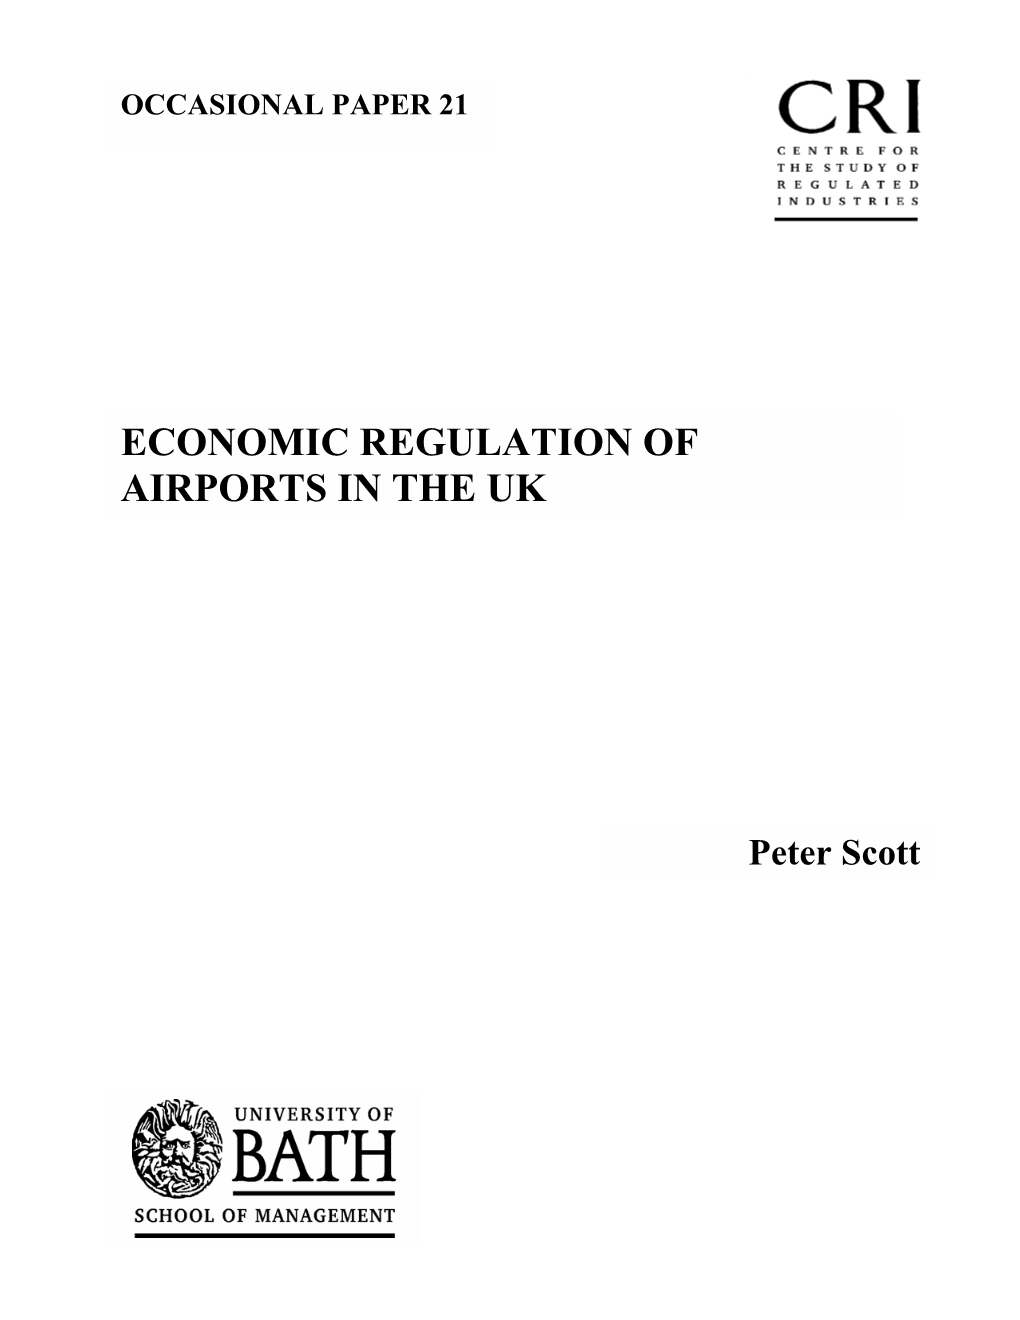 Economic Regulation of Airports in the Uk